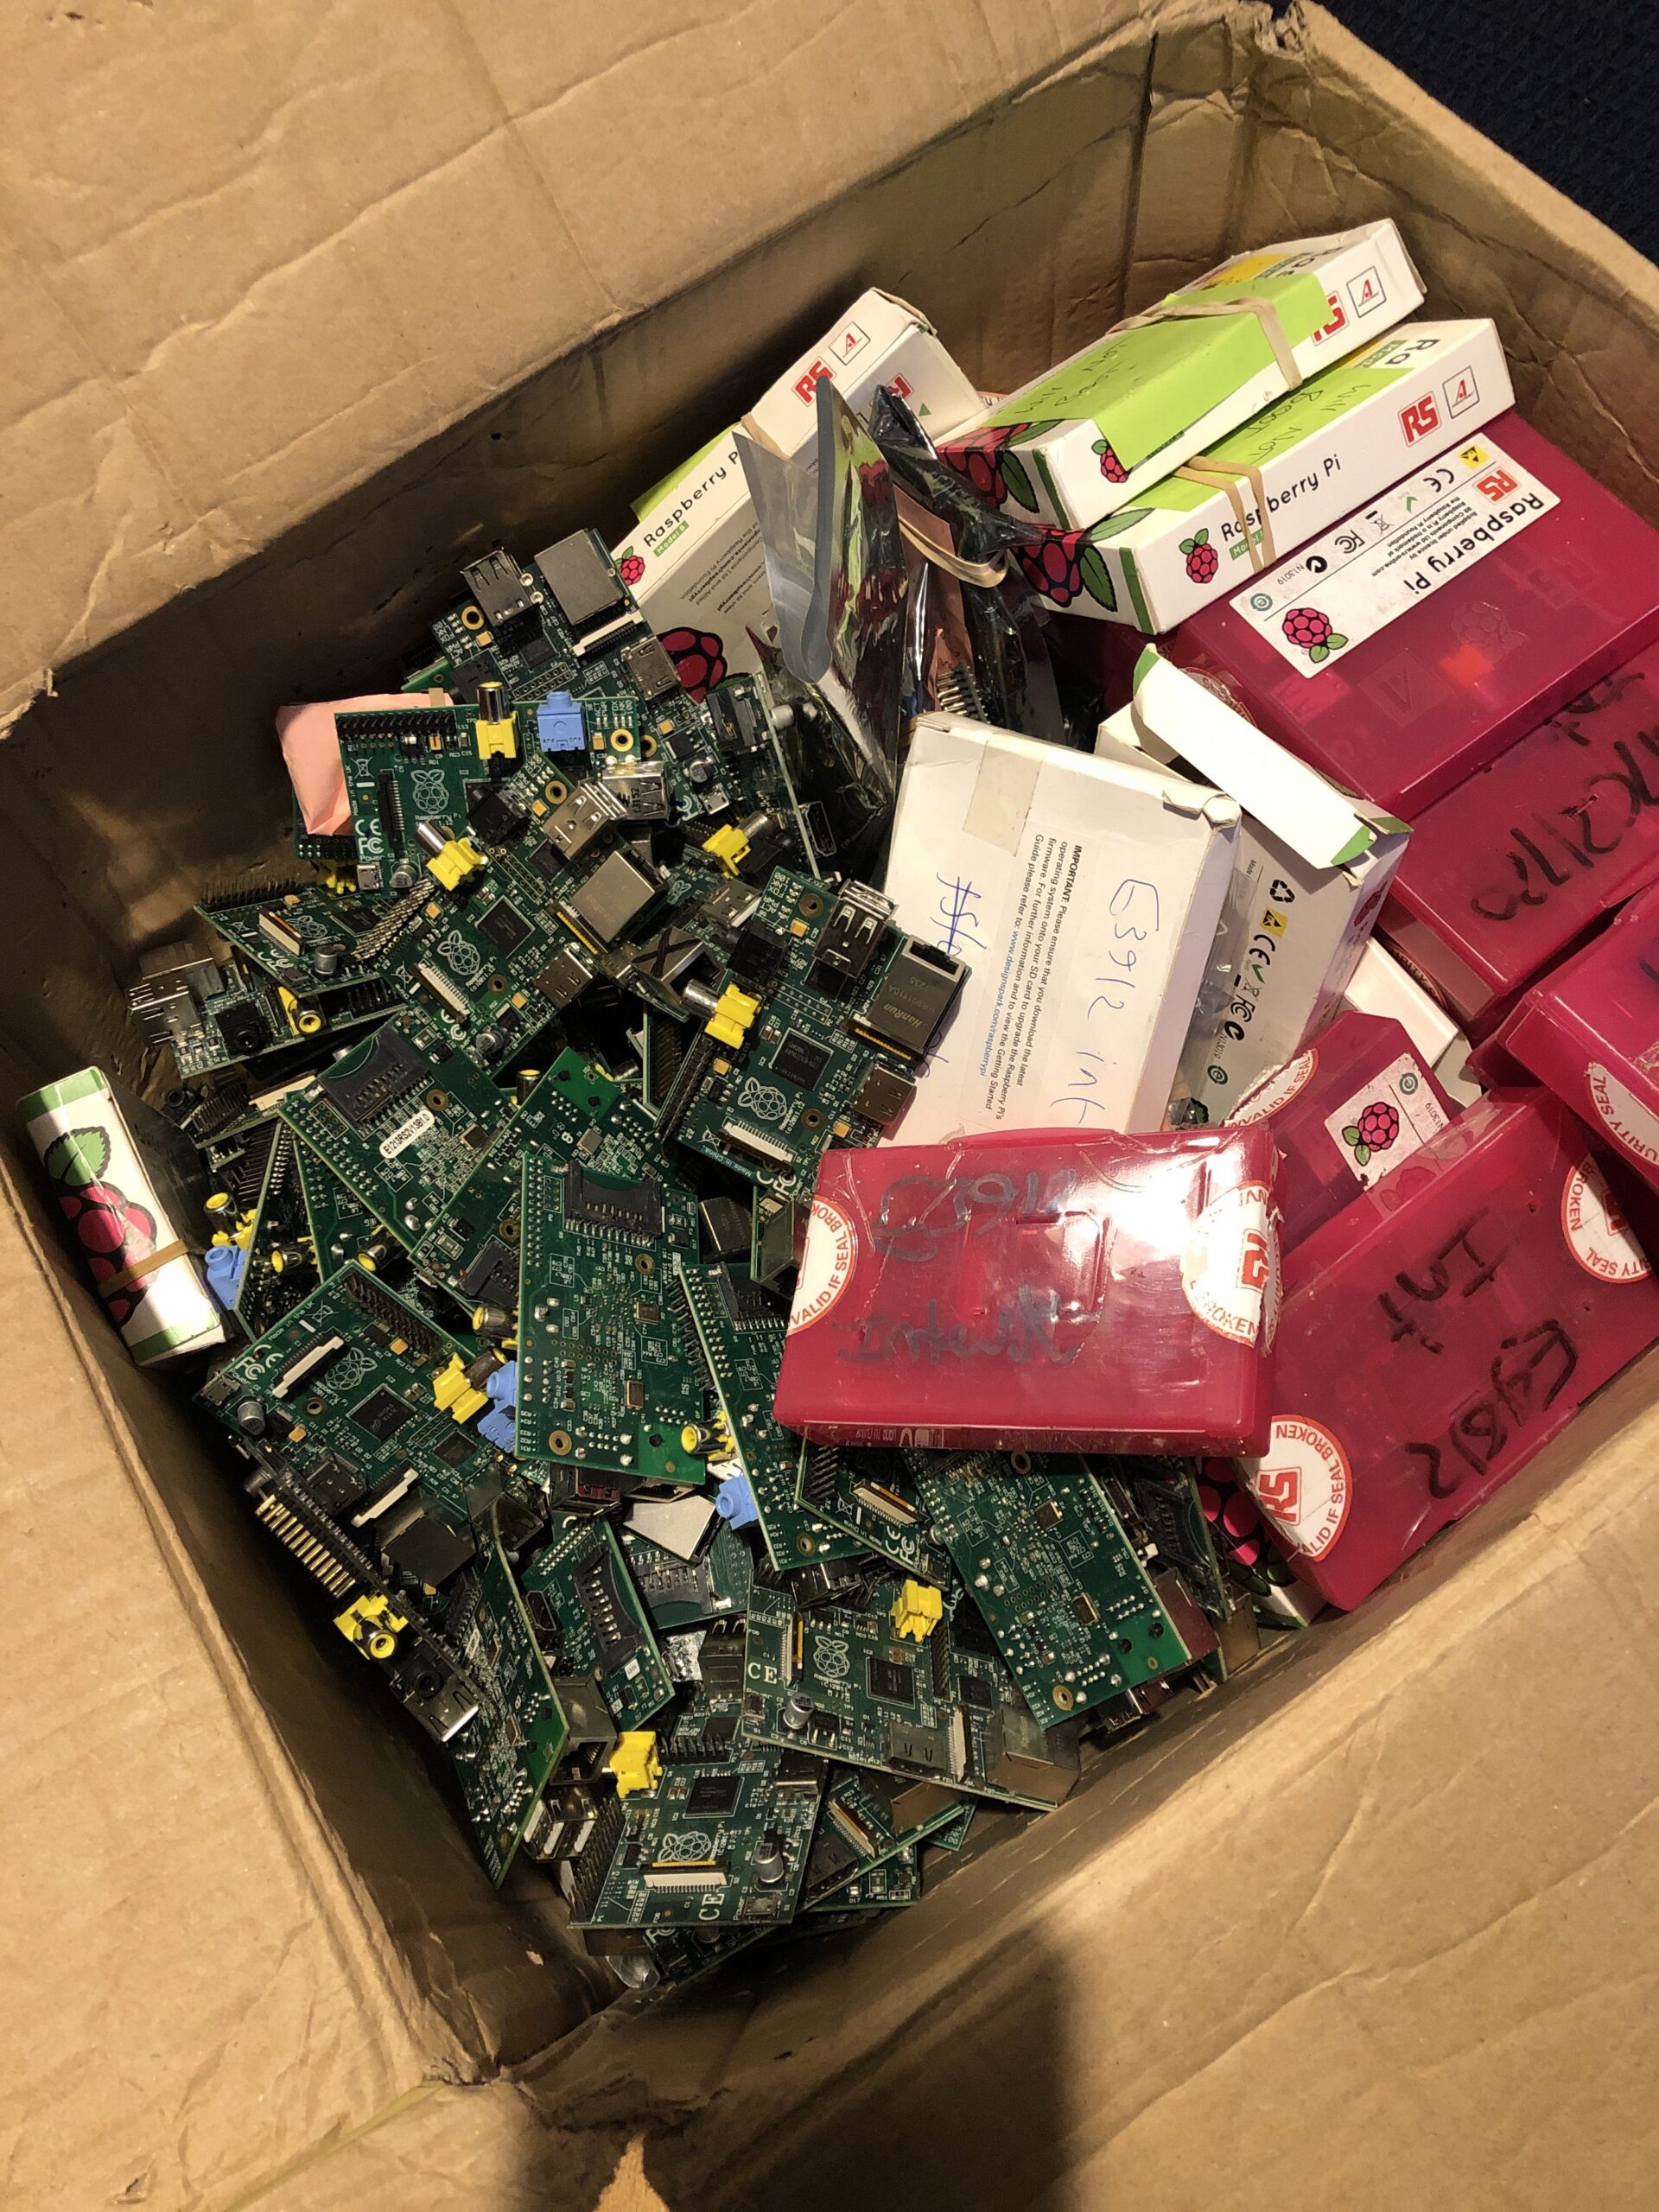 I bought 200 Raspberry Pi Model B’s and I’m going to fix them